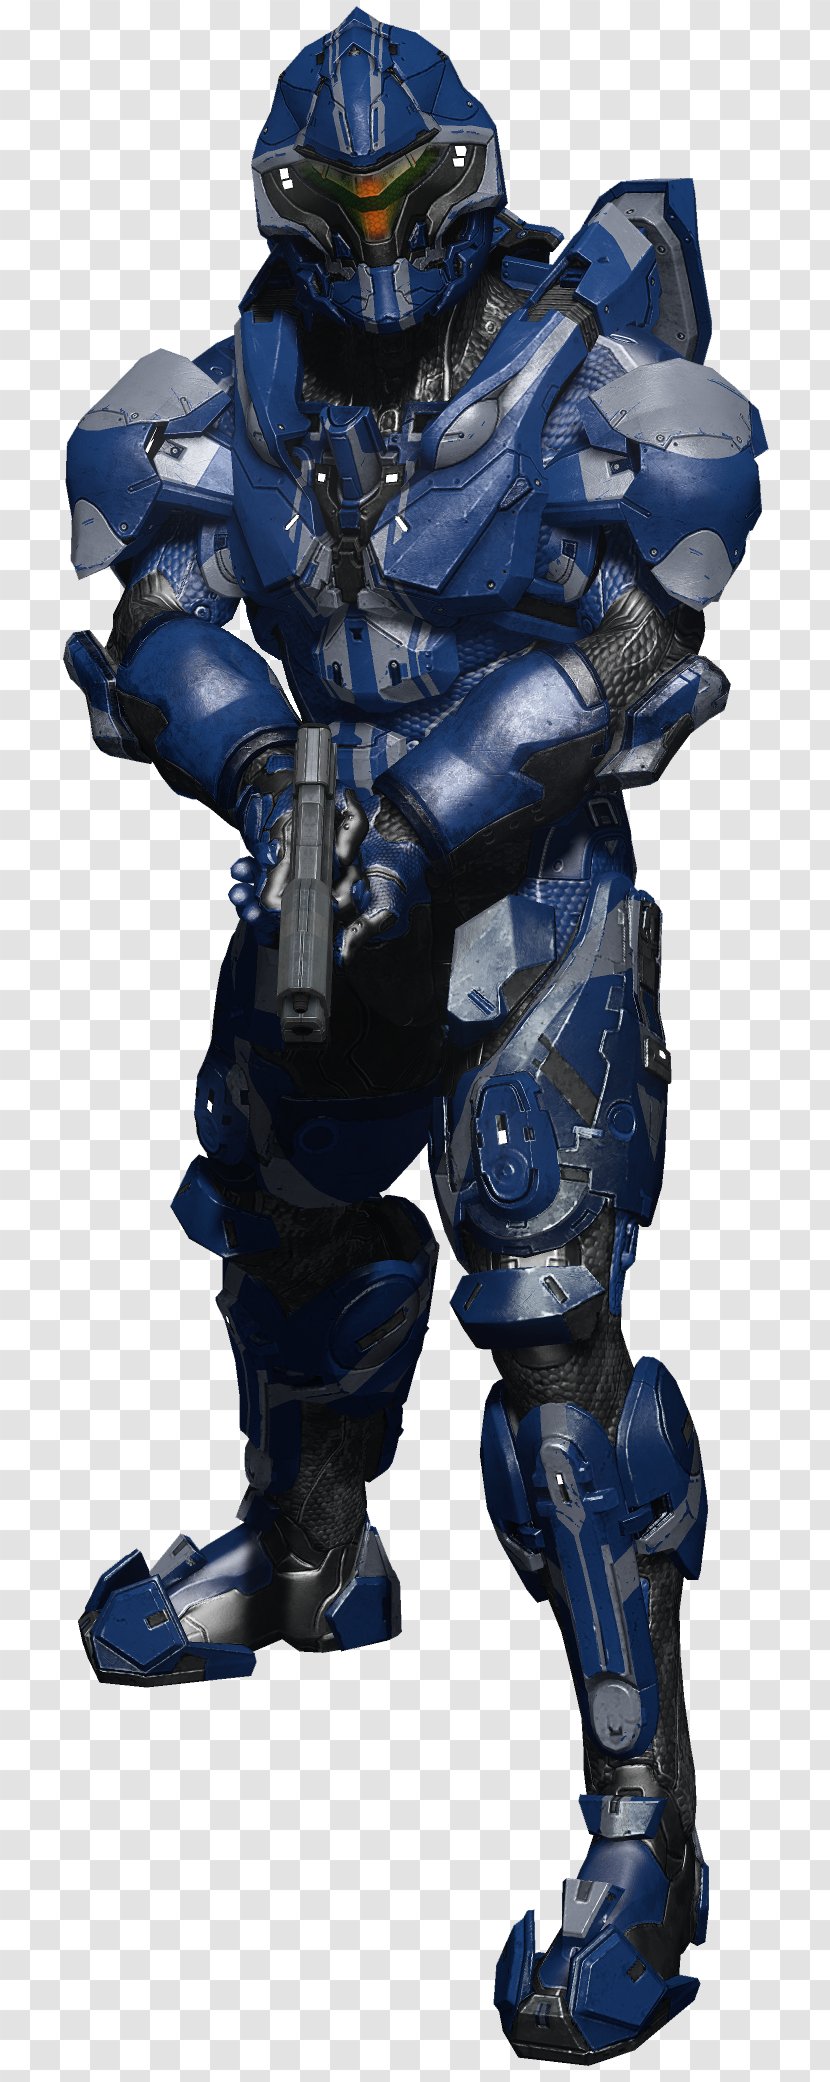 Halo 4 5: Guardians Pathfinder Roleplaying Game Master Chief Wars 2 - Multiplayer Video Transparent PNG